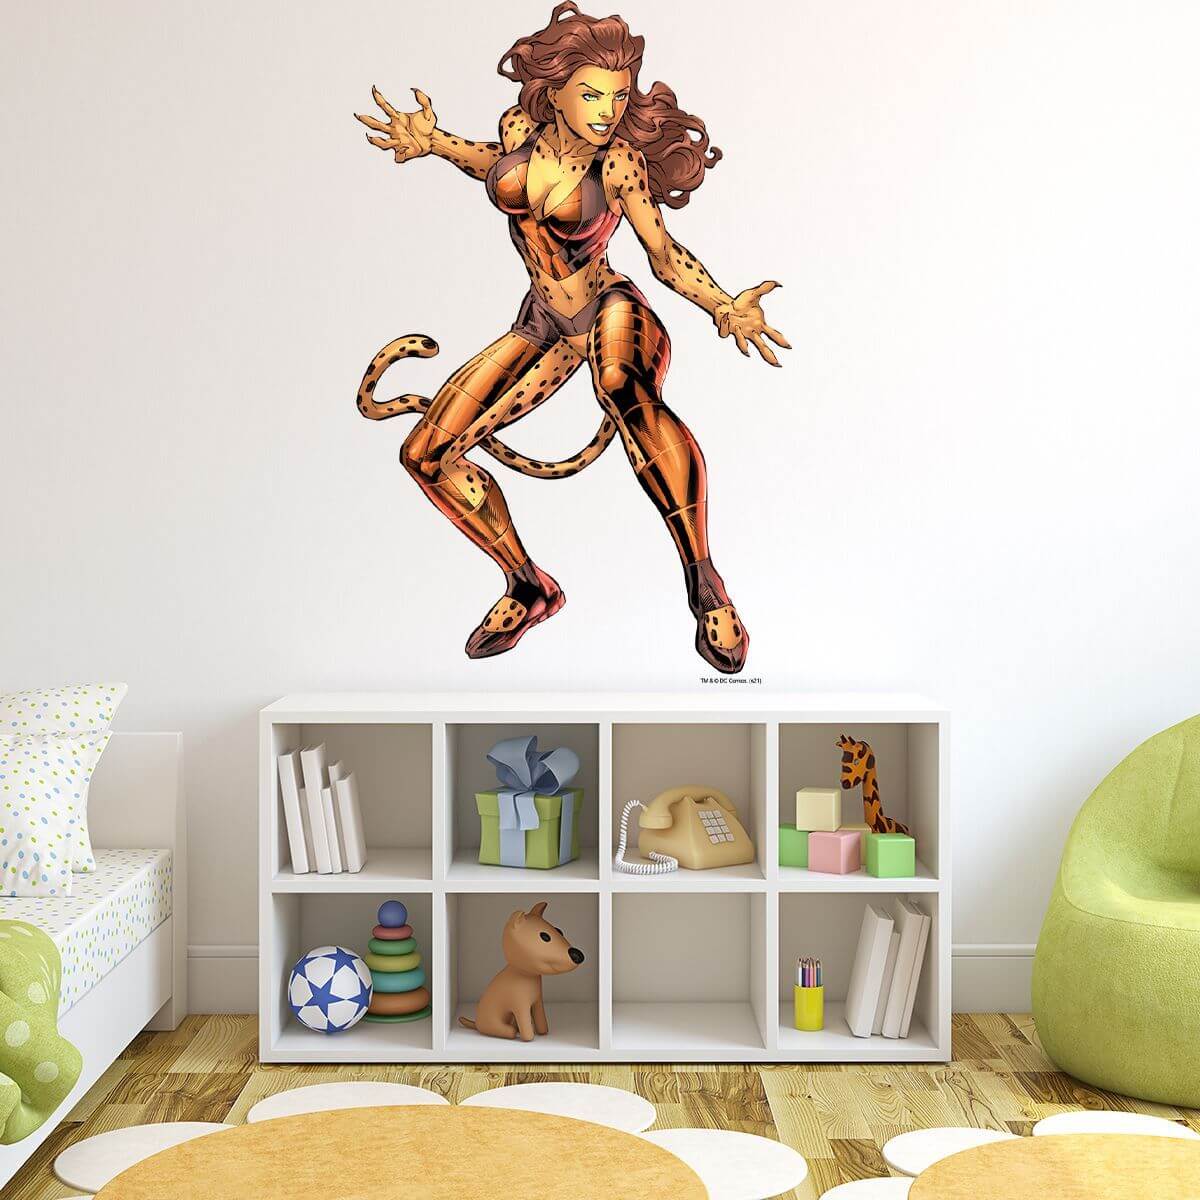 Kismet Decals Cheetah Malicious Cat Licensed Wall Sticker - Easy DIY Justice League Home & Room Decor Wall Art - Kismet Decals